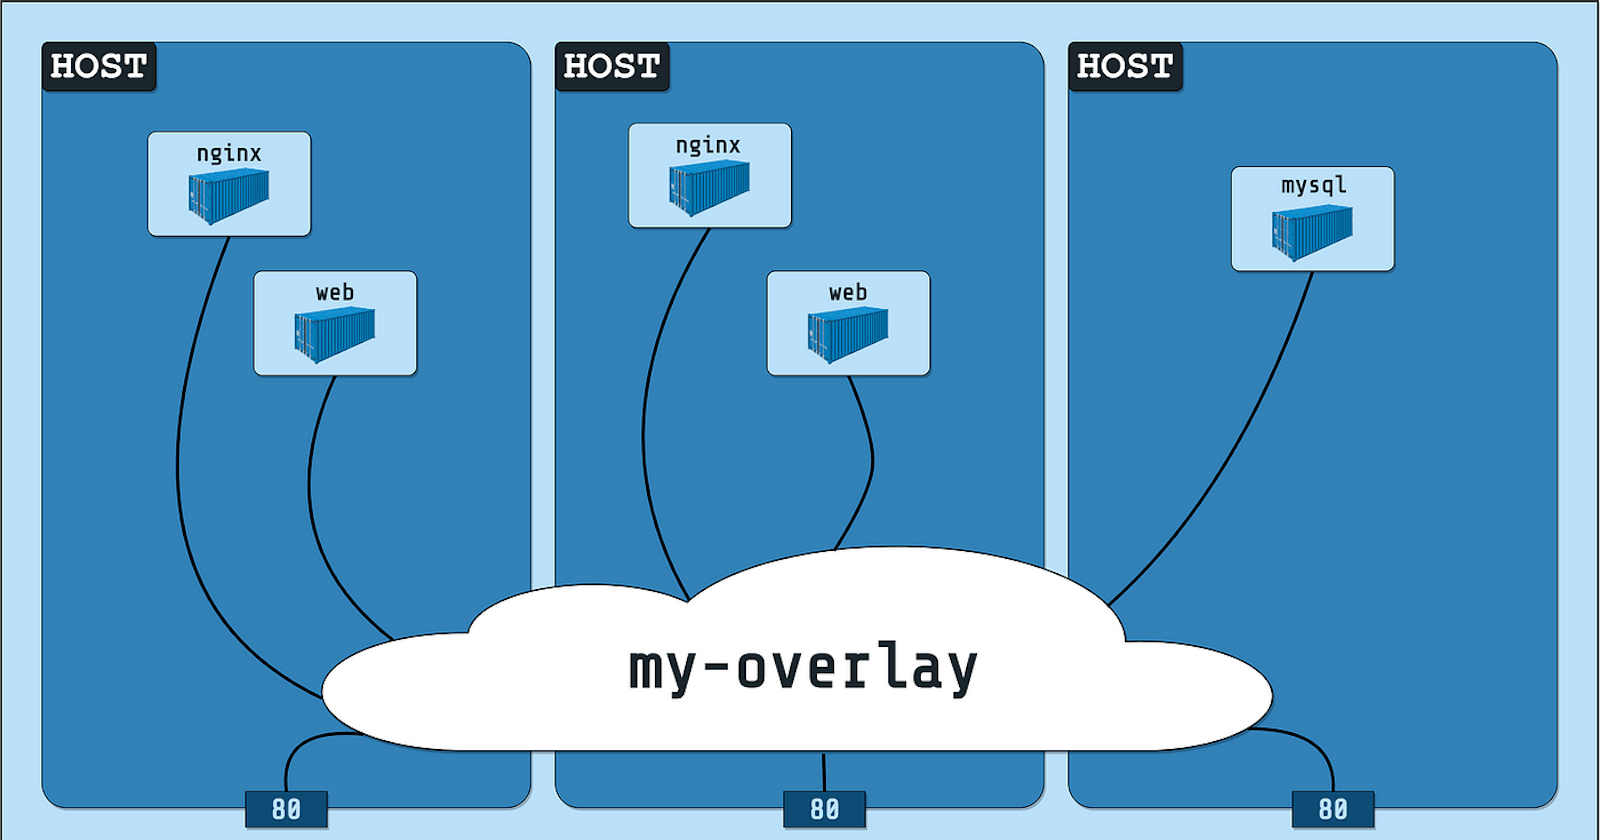 Overlay network driver